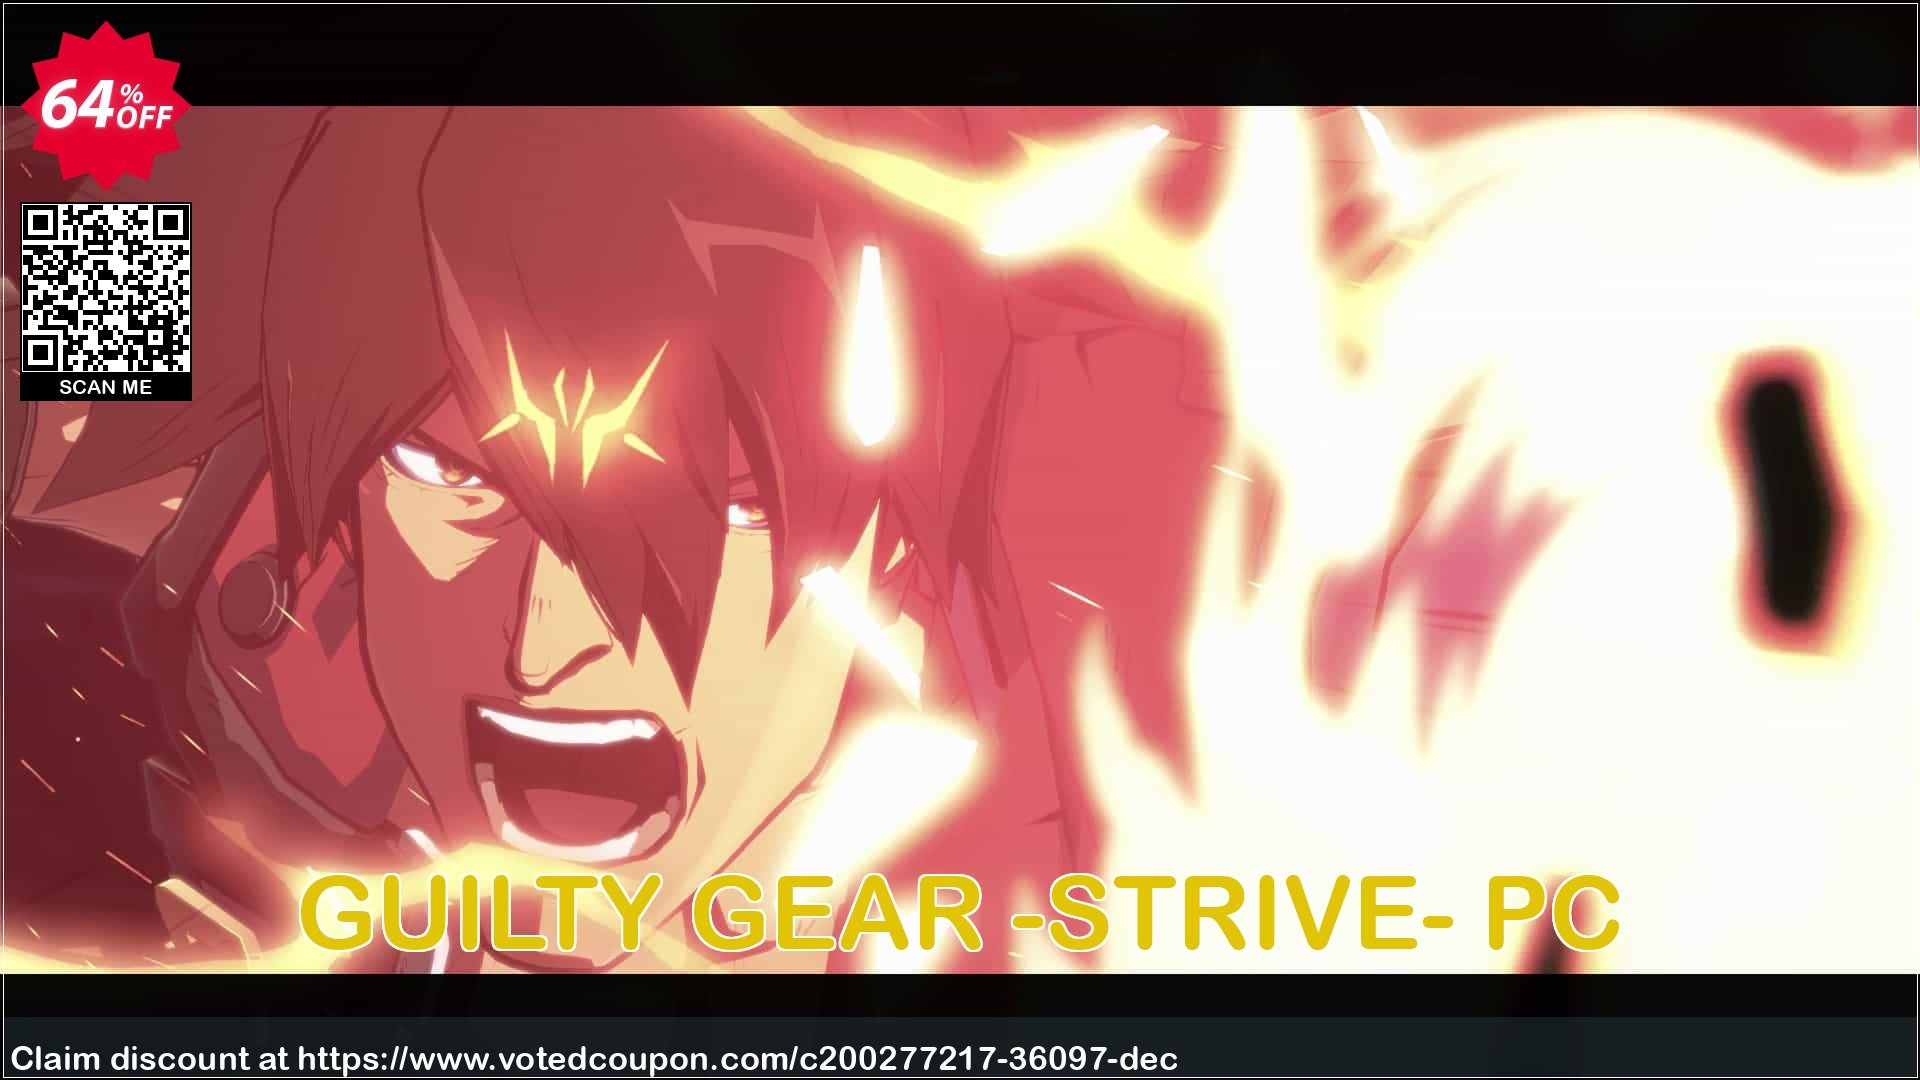 GUILTY GEAR -STRIVE- PC Coupon Code Apr 2024, 64% OFF - VotedCoupon